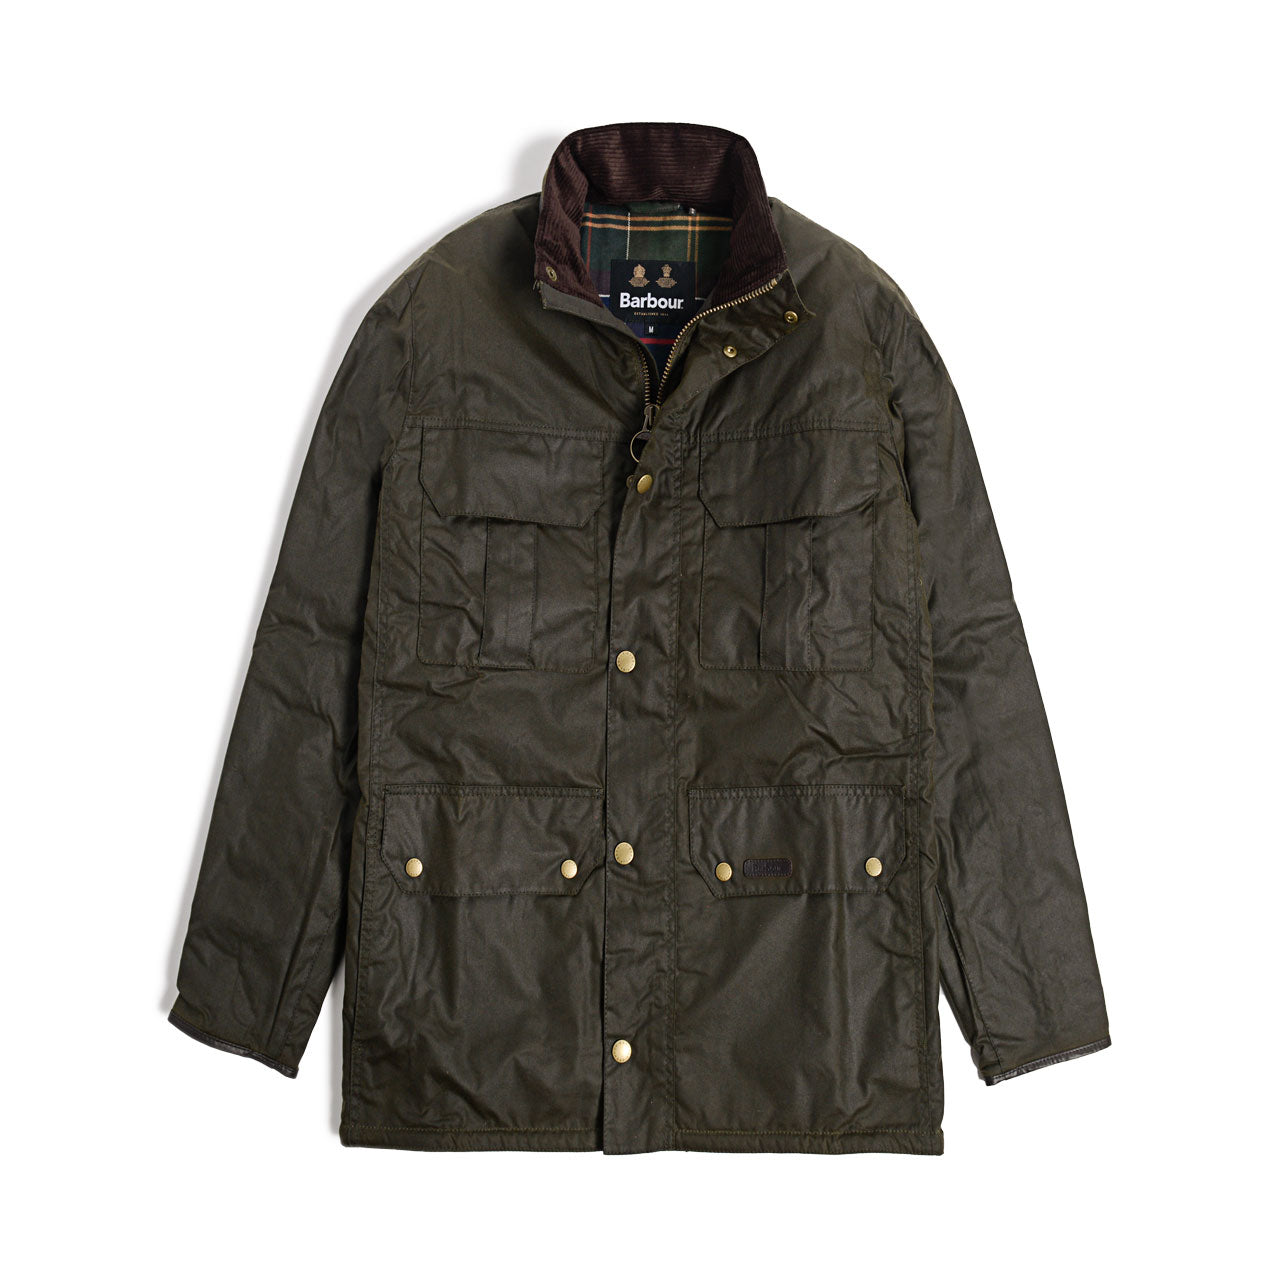 Barbour Malcolm Waxed Jacket Medium